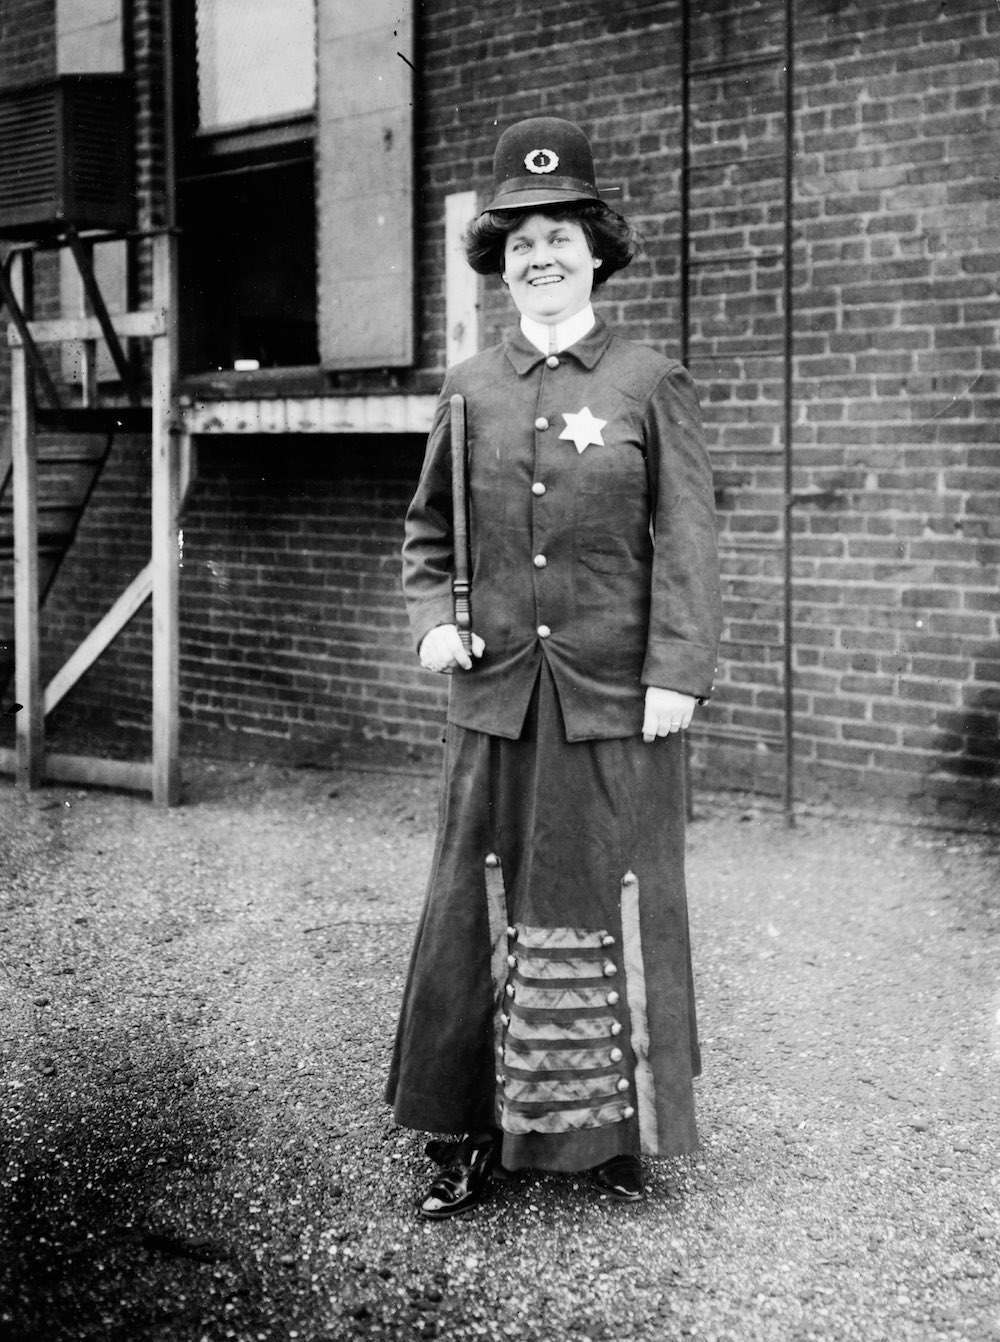 'The Woman Cop (A Dream)' Suffragette Imagines Being